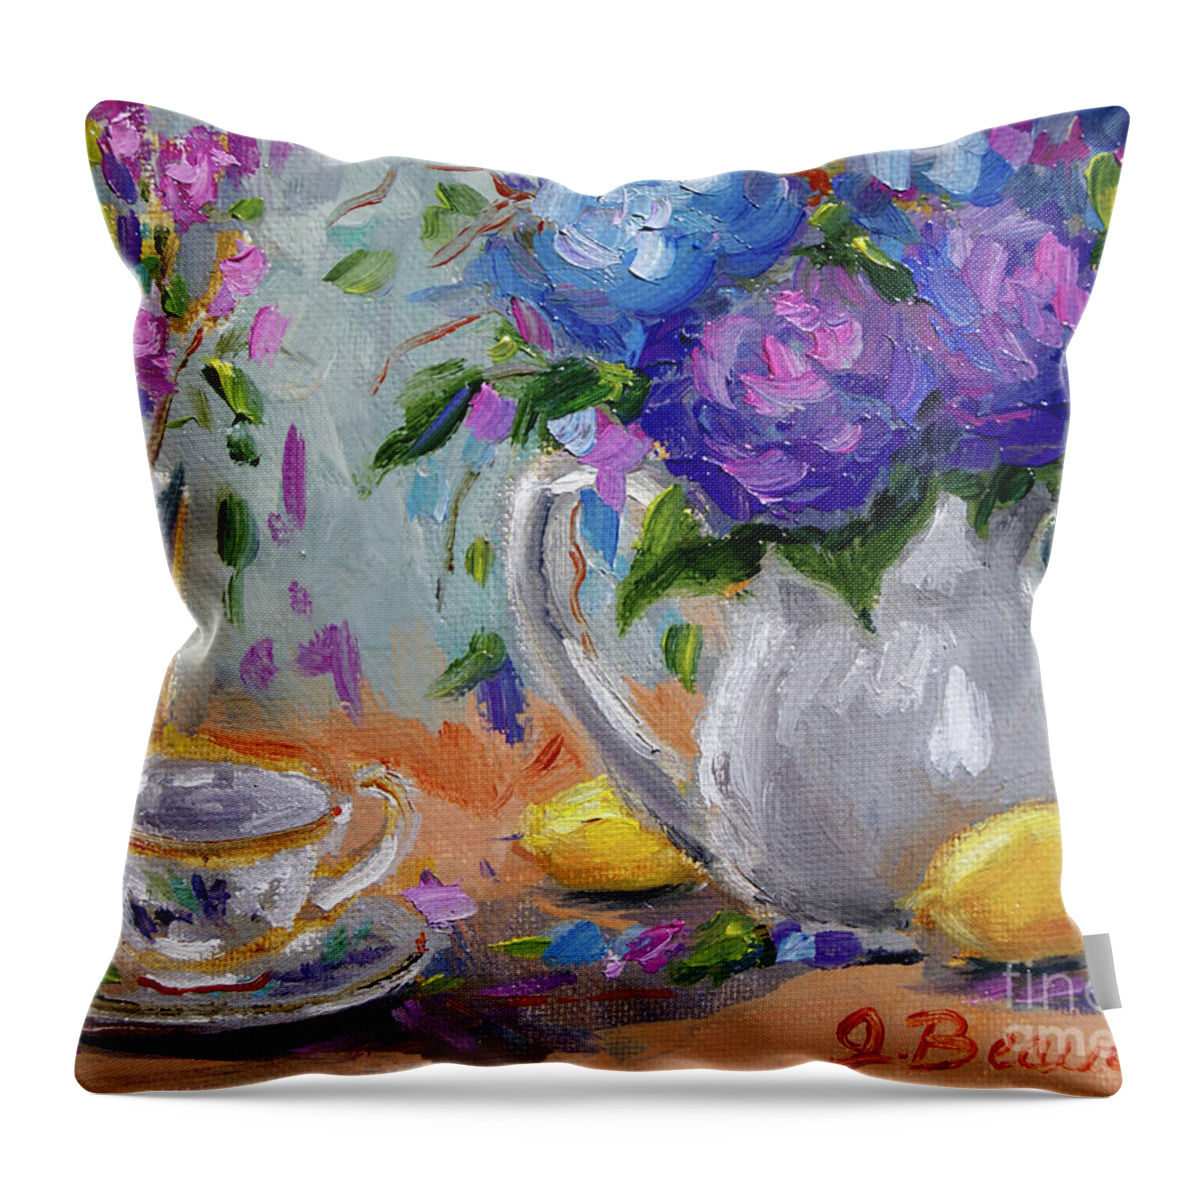  Throw Pillow featuring the painting Flowers Lemons by Jennifer Beaudet